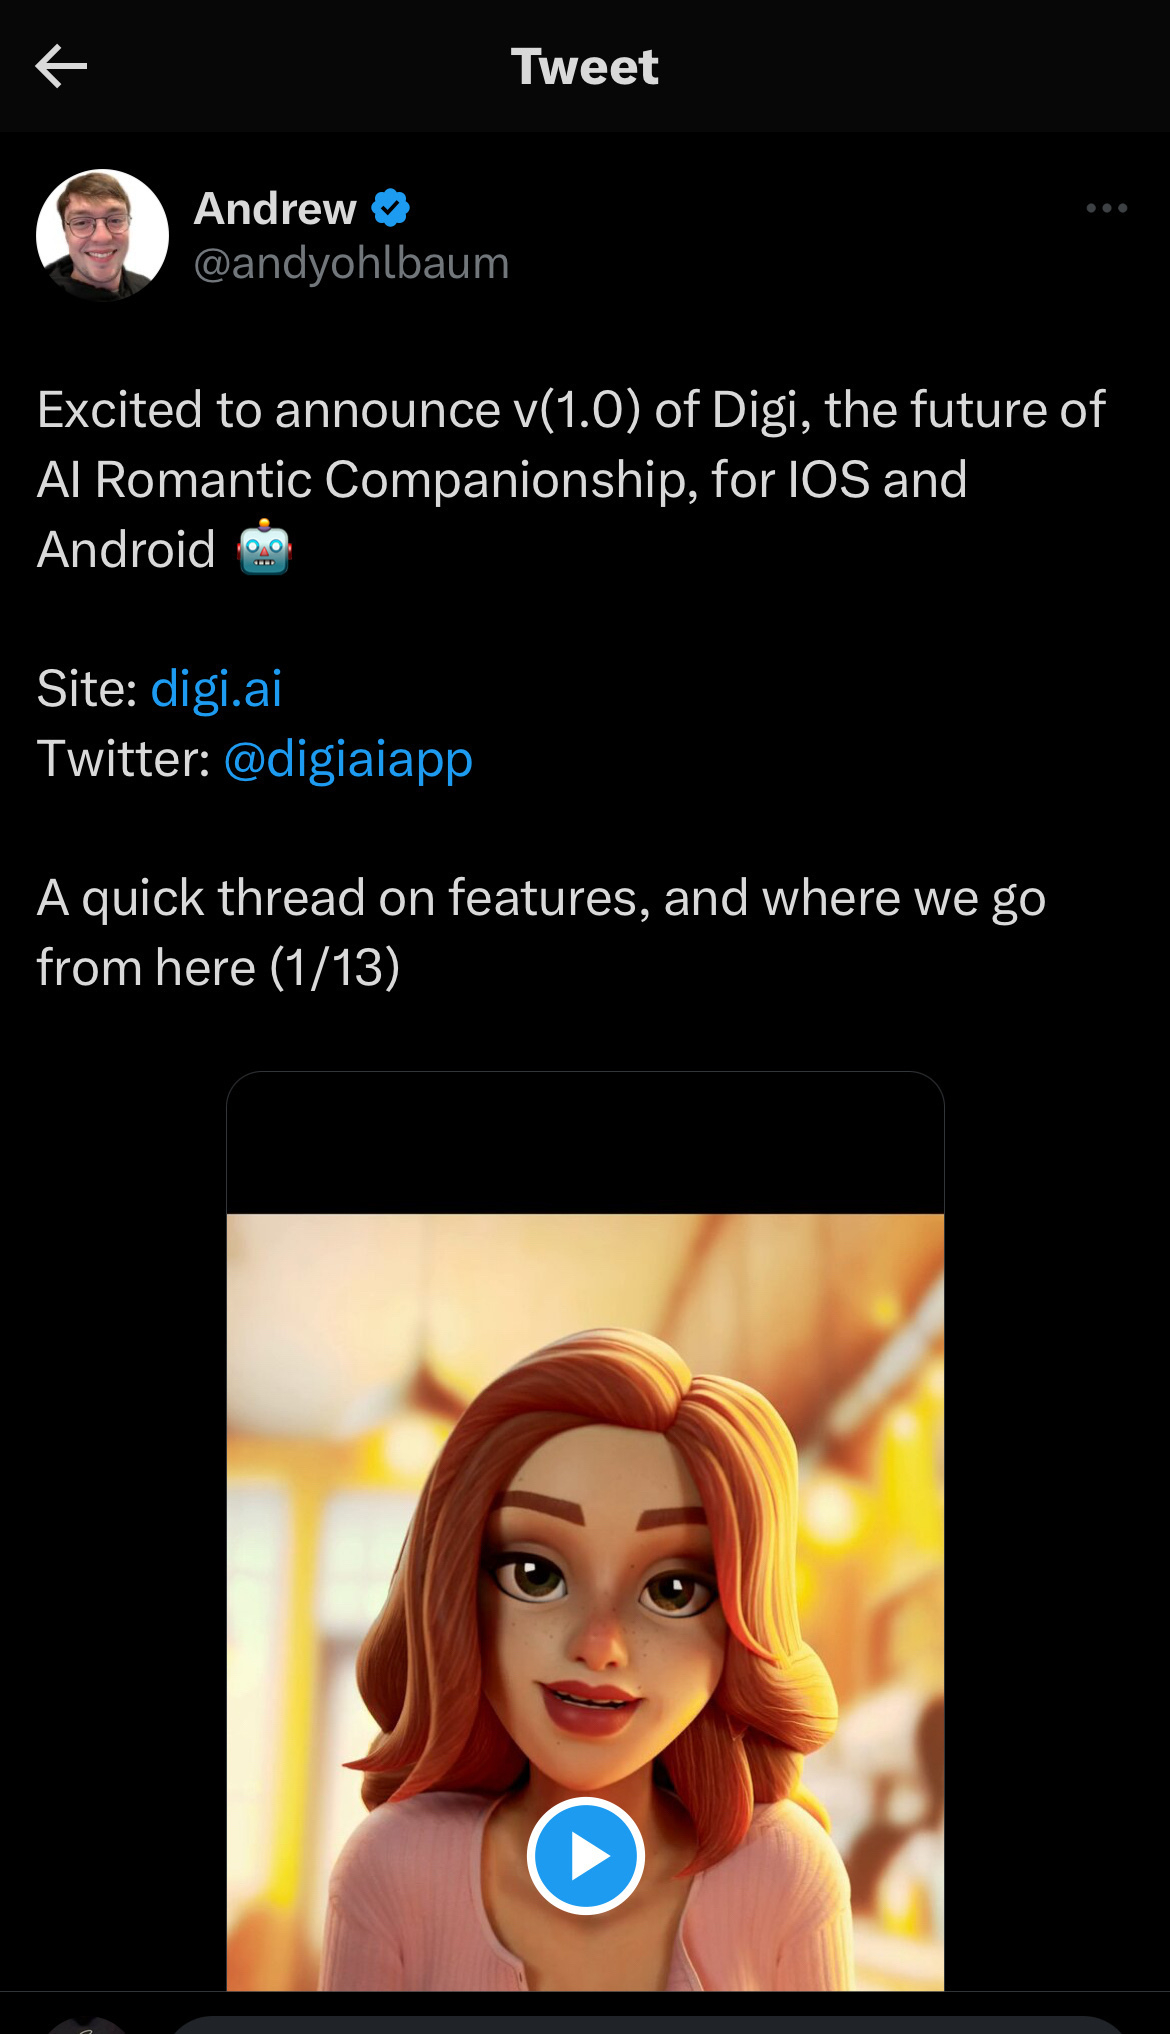 Excited to announce v(1.0) of Digi, the future of AI Romantic Companionship, for IOS and Android 🤖&10;&10;Site: digi.ai&10;Twitter: @digiaiapp &10;&10;A quick thread on features, and where we go from here (1/13)